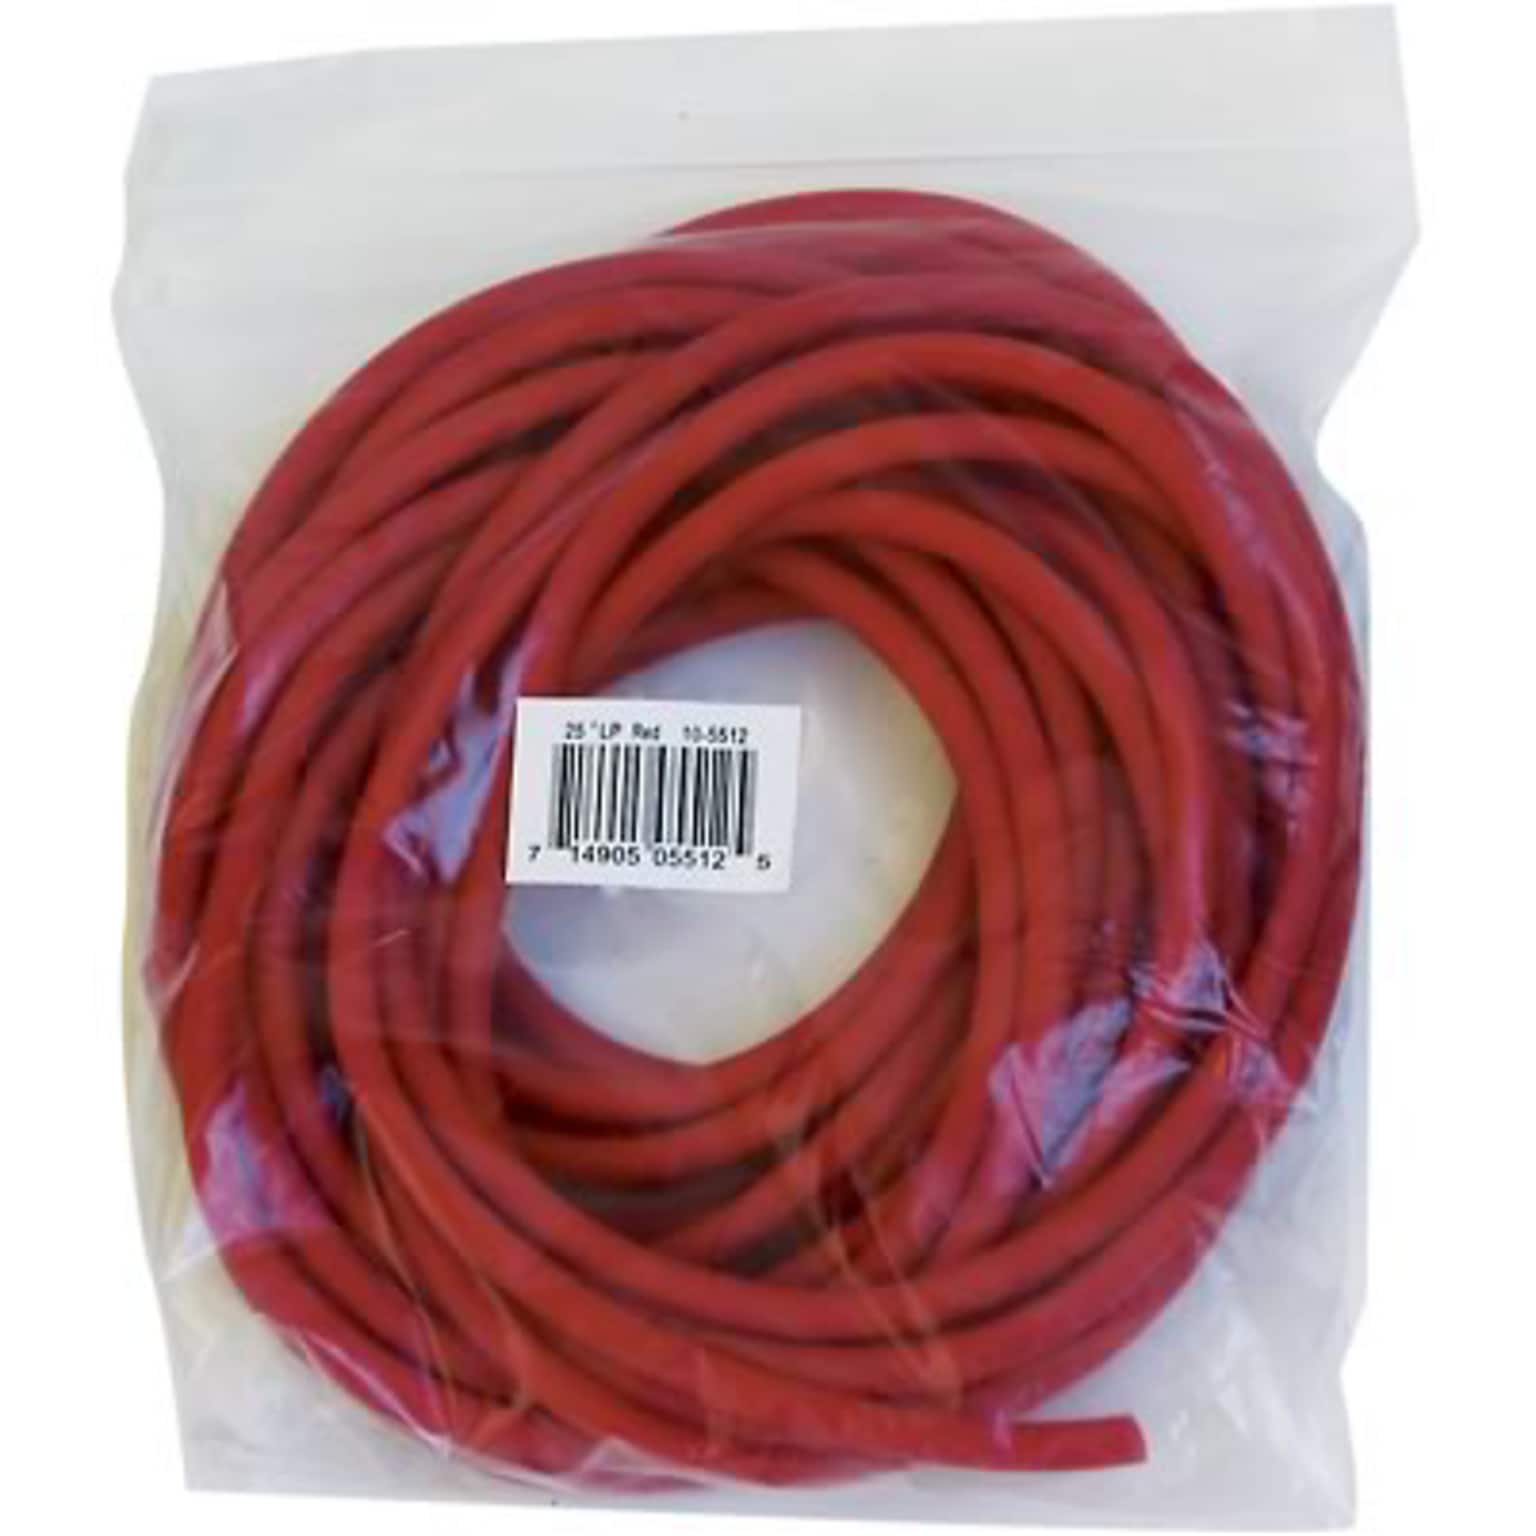 Cando® Resistive Exercise Tubing 25 Foot Package; Light, Red